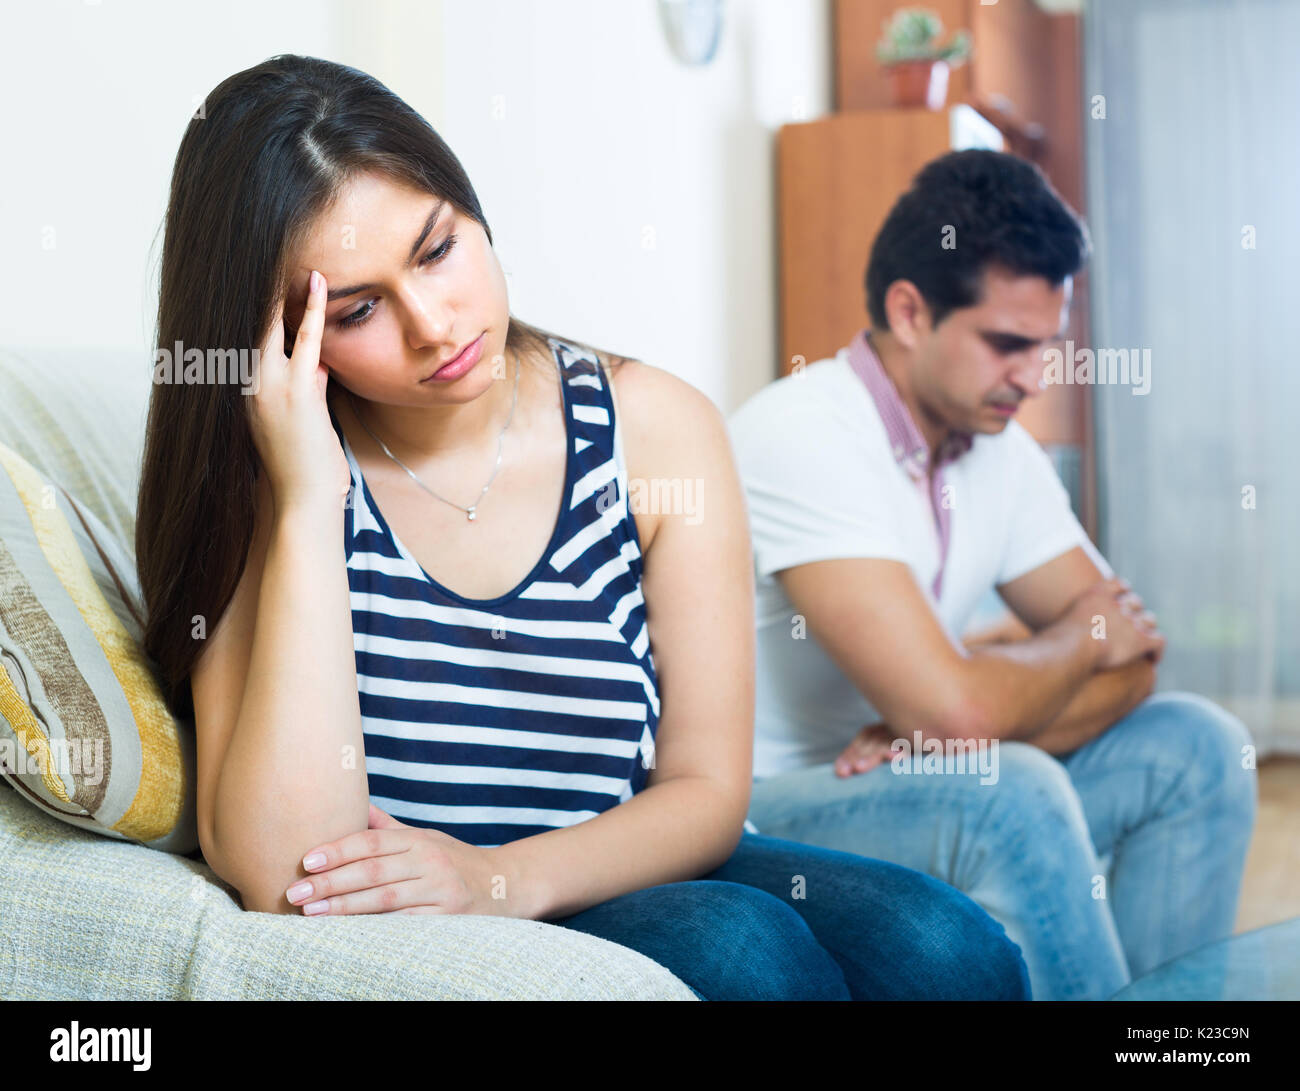 Young sulking man and woman blaming each other during indoor quarrel Stock Photo